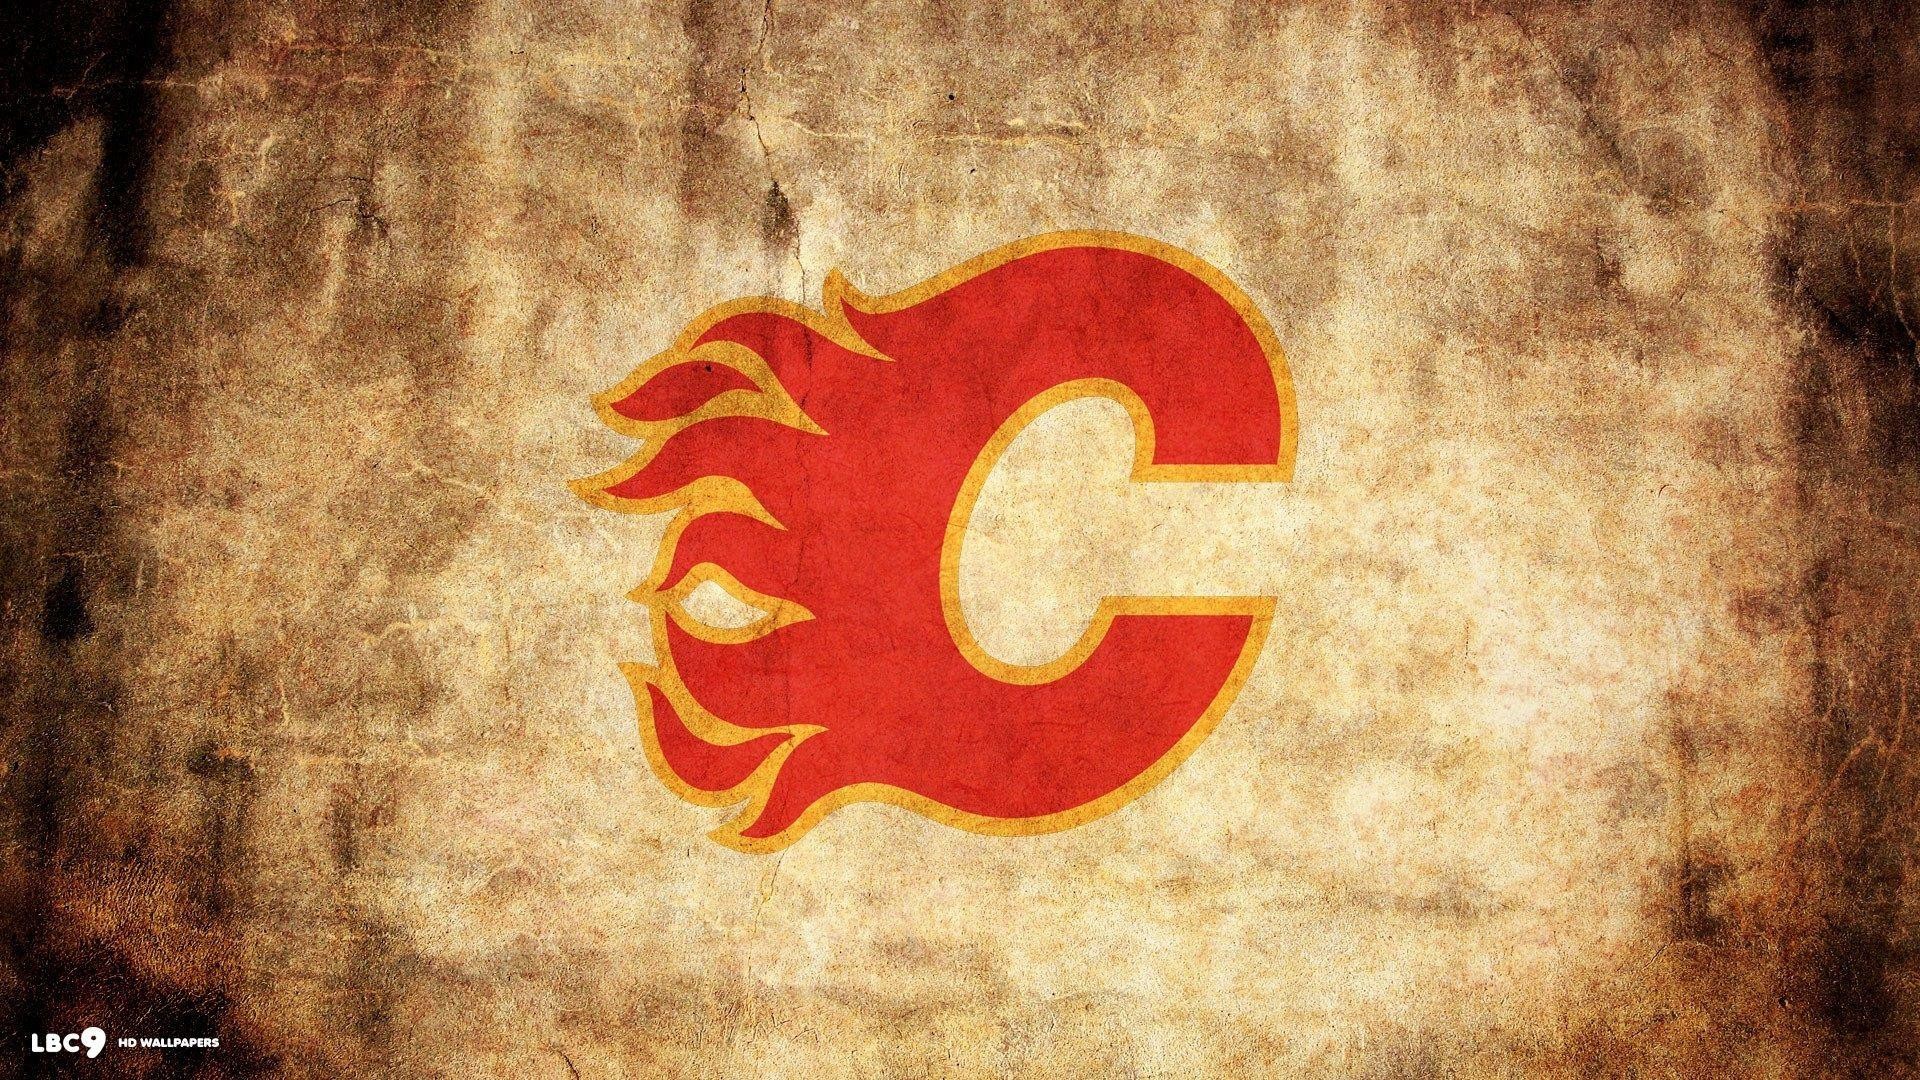 66 Calgary Flames Wallpapers on WallpaperPlay